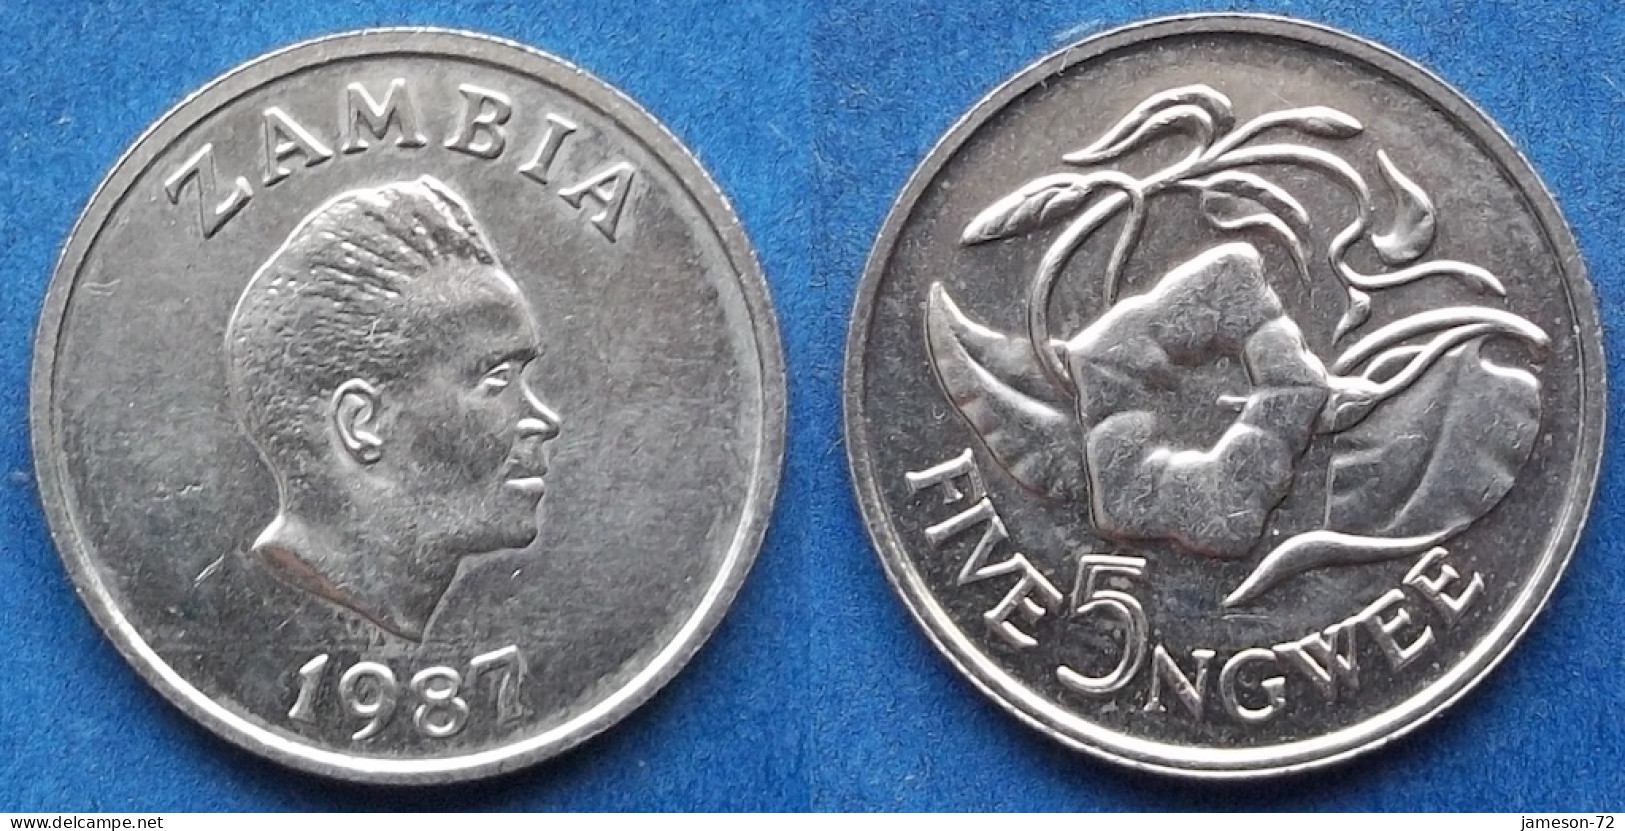 ZAMBIA - 5 Ngwee 1987 "Morning Glory" KM# 11 Decimal Coinage (1968-2013) - Edelweiss Coins - Sambia